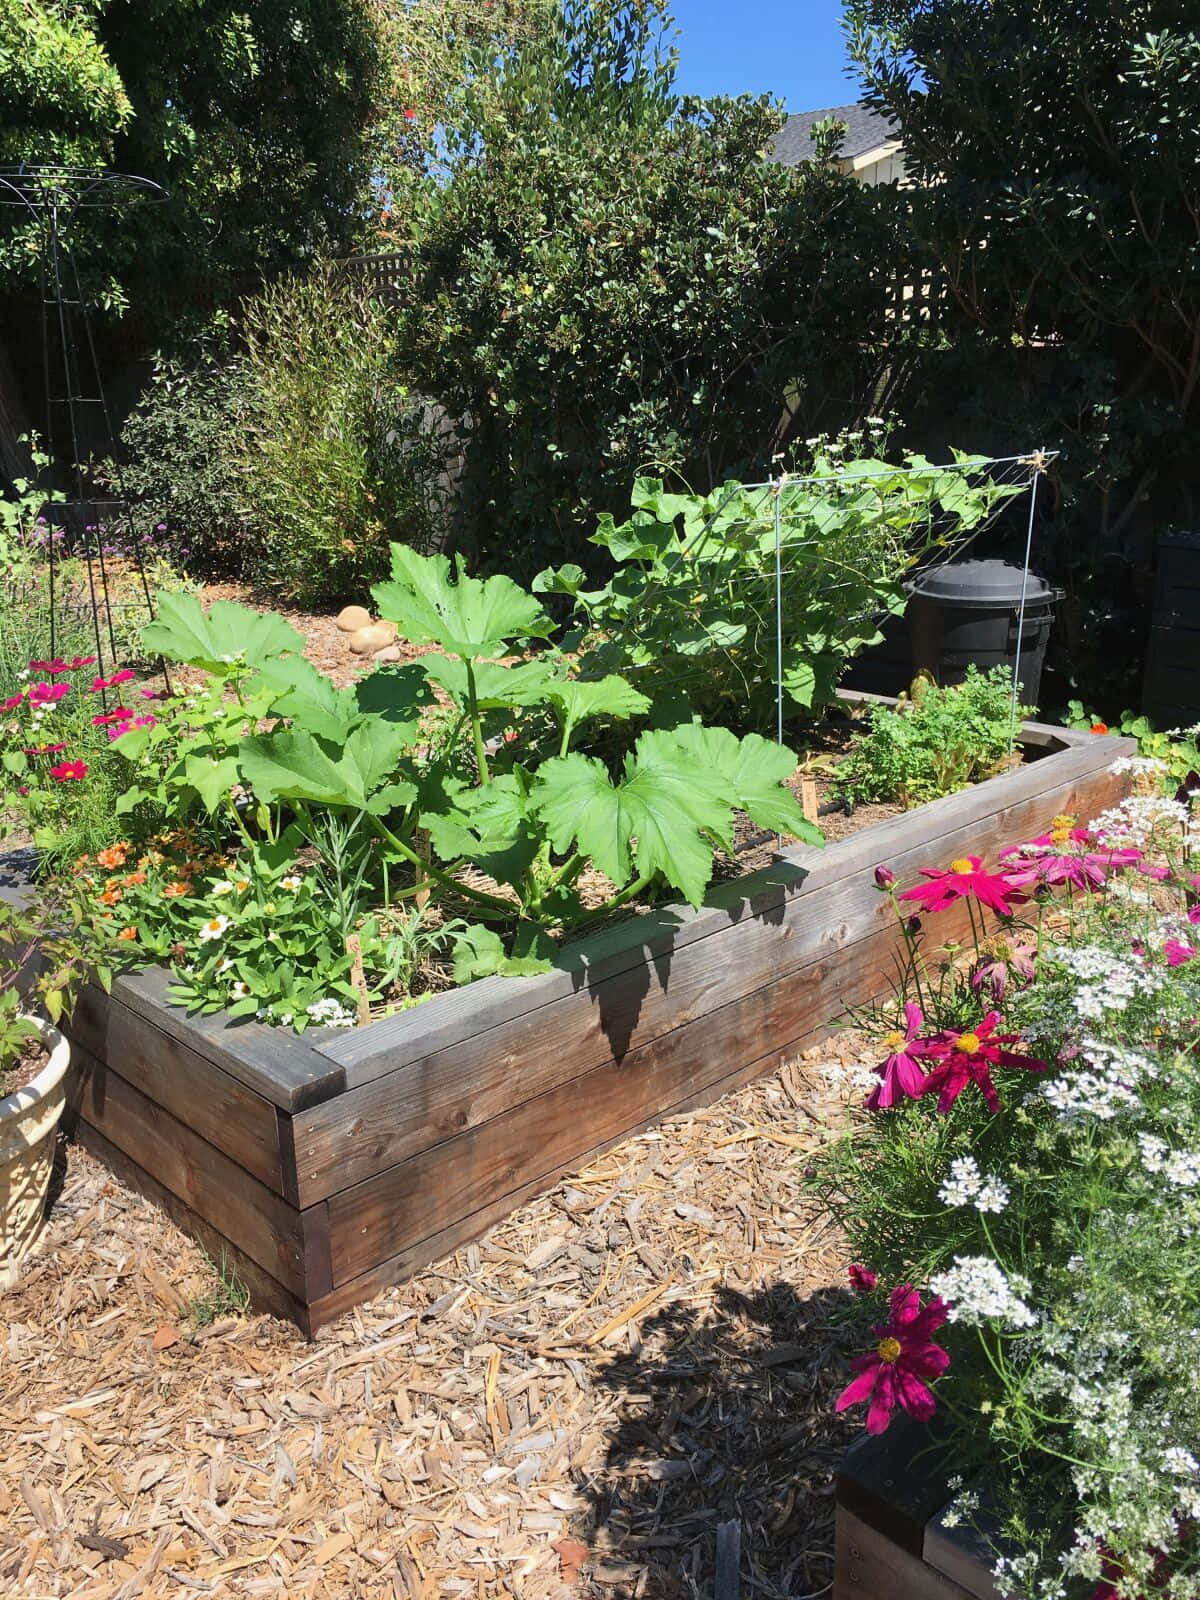 A Wooden Raised Bed